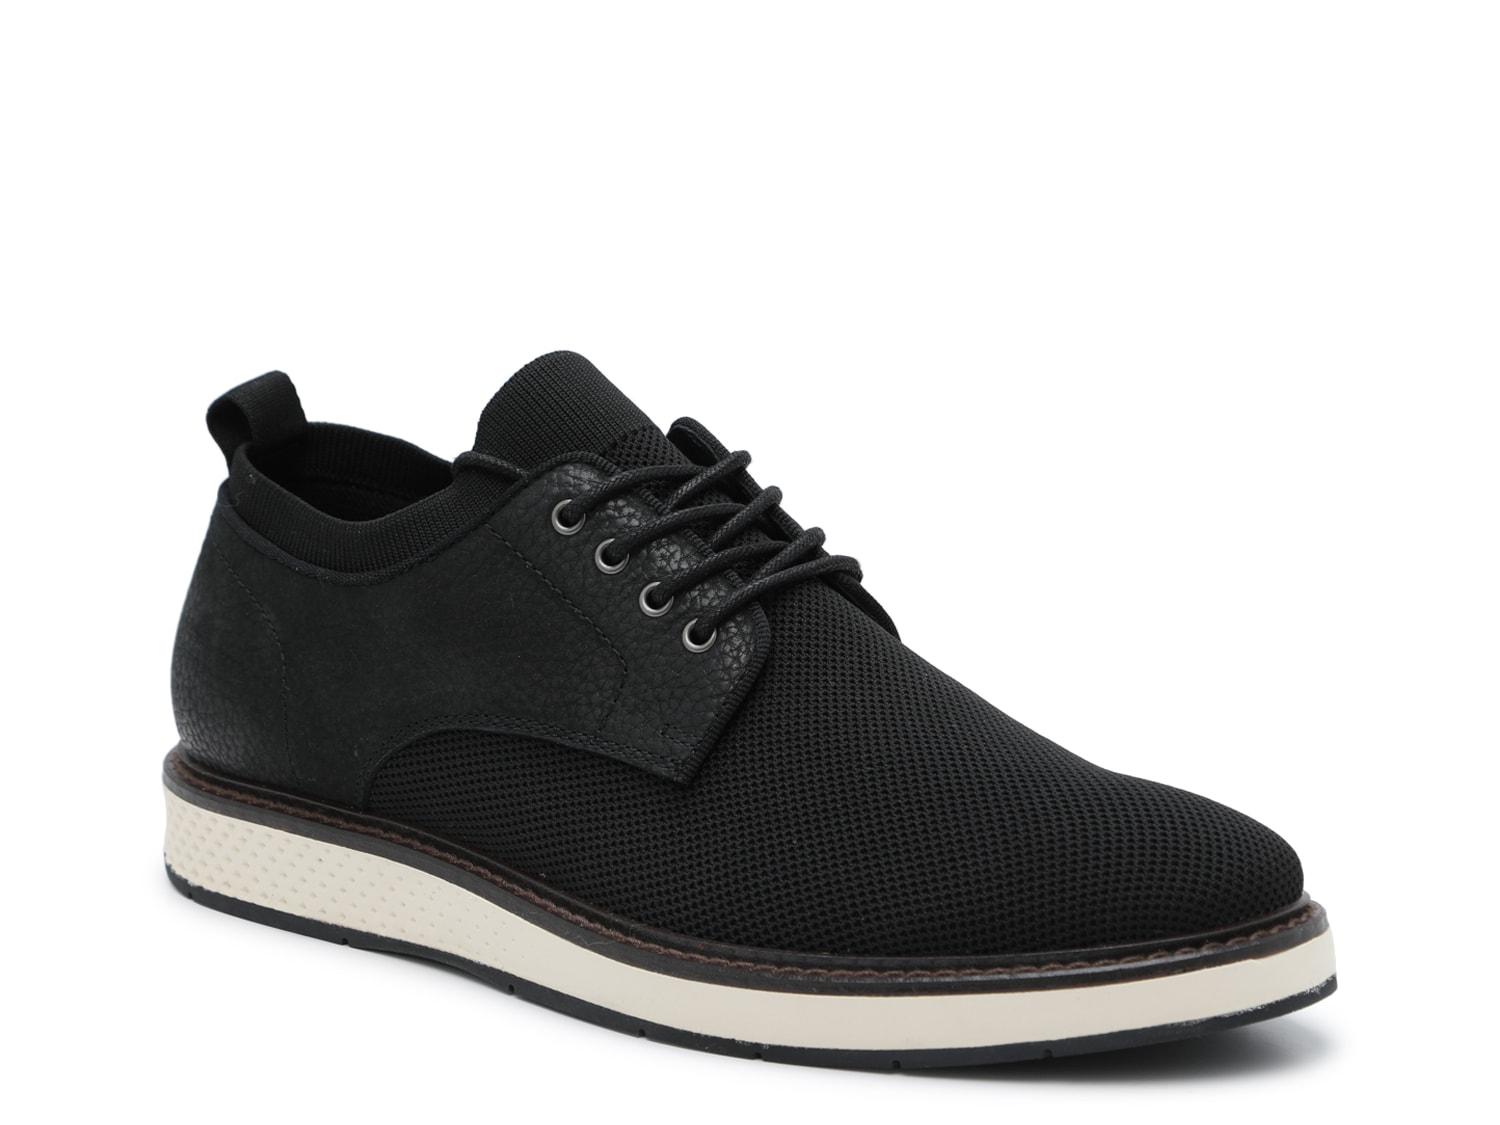 Vince Camuto Eero Oxford - Free Shipping | DSW